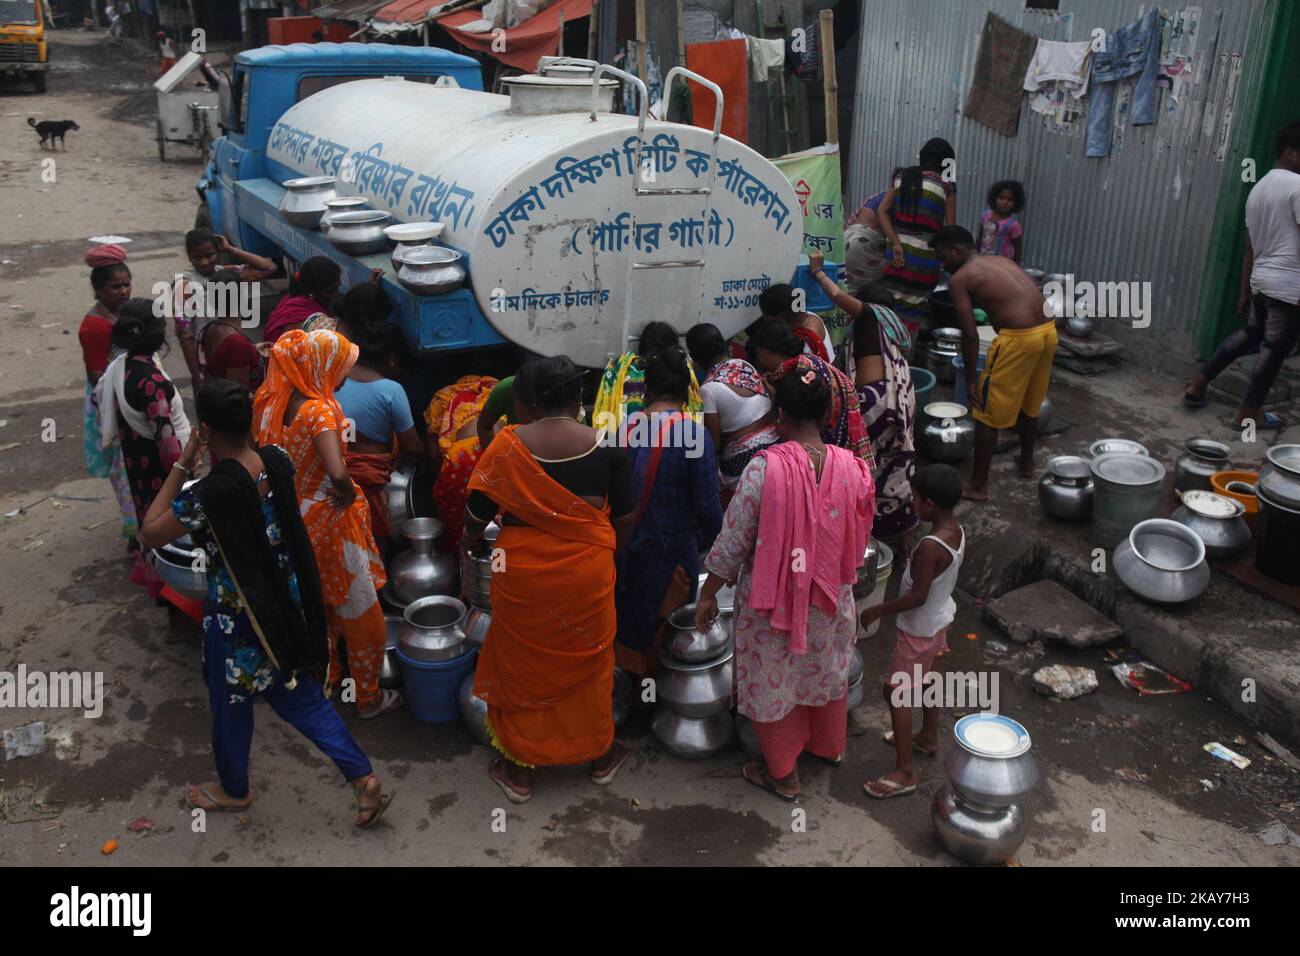 Bangladeshi women collect drinking water in Dhaka on June 5, 2018.With a population of over 15 million people, Dhaka is the capital of Bangladesh is considered a mega-city and shares many of the water management problems common to other major cities.While efforts are made to sustain water quantity and quality in city water supplies, Dhaka pumping has caused groundwater levels to drop more than 200 feet over the last 50 years and these levels continue to decline at a rate of up to 9 feet per year. (Photo by Mehedi Hasan/NurPhoto) Stock Photo